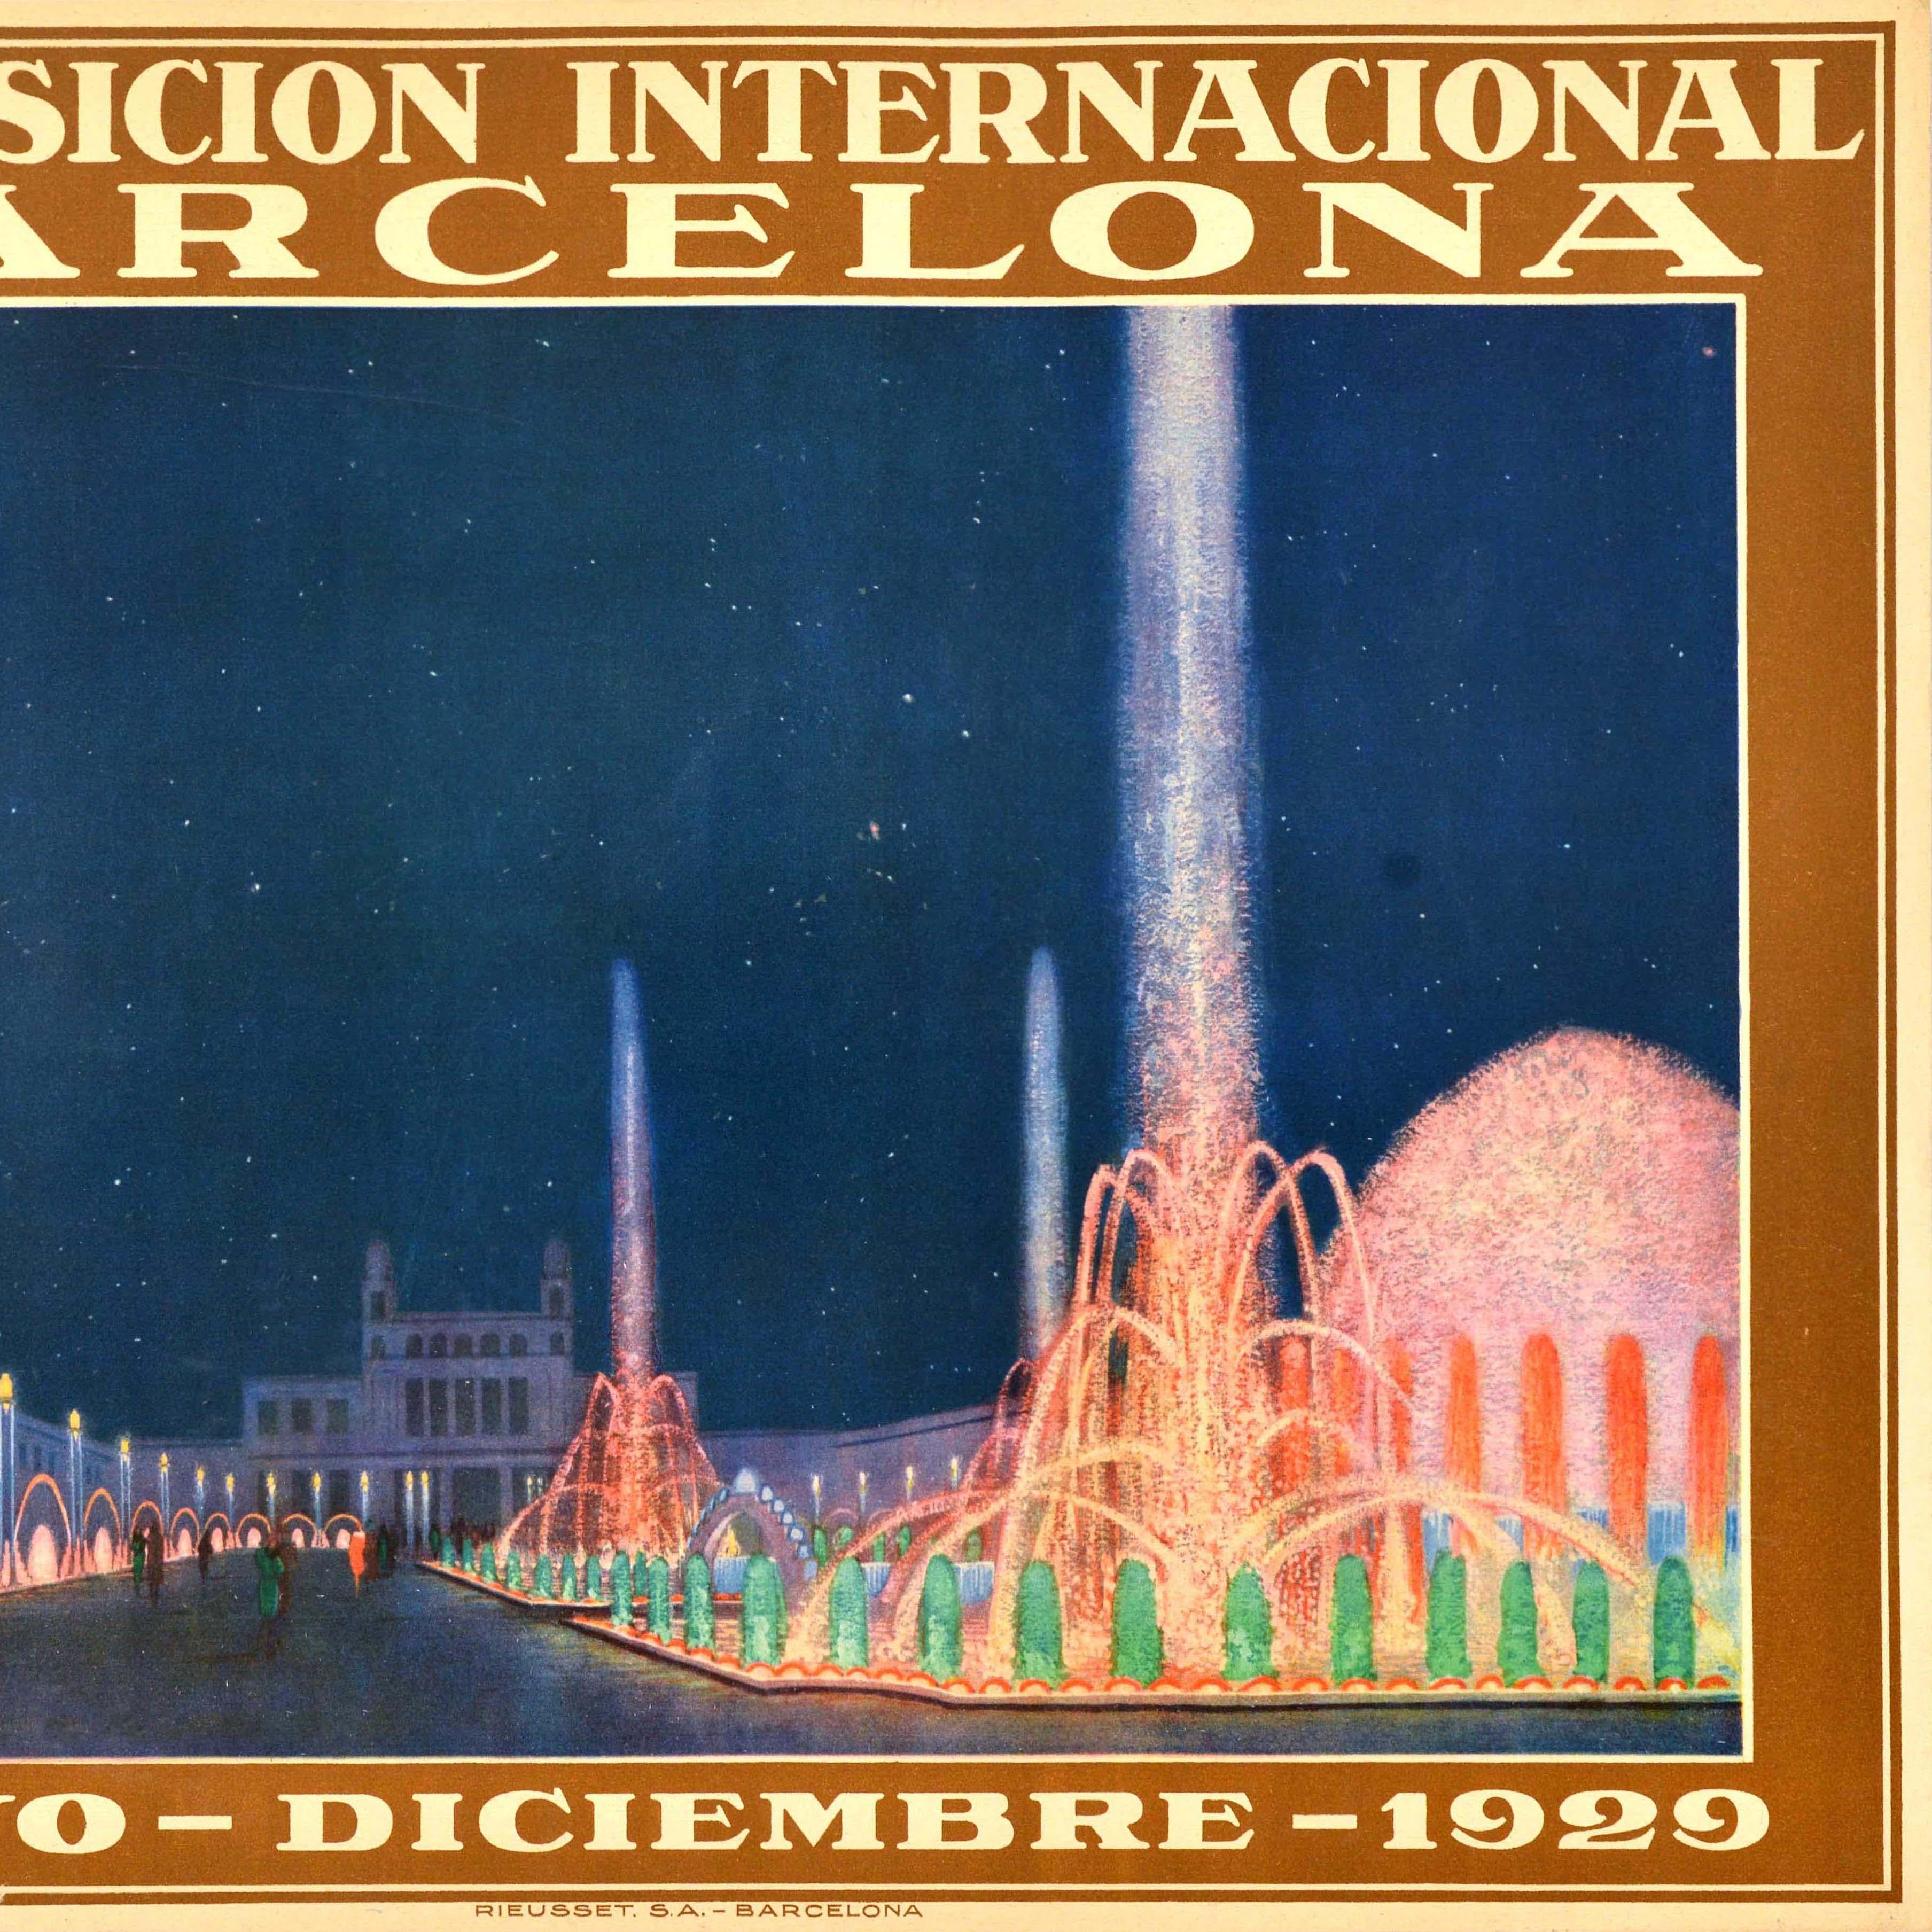 Original vintage advertising poster for the Exposicion Internacional Barcelona International Exposition held from 20 May 1929 to 15 January 1930 featuring an illustration of people walking along the colourful Magic Fountain and water display powered